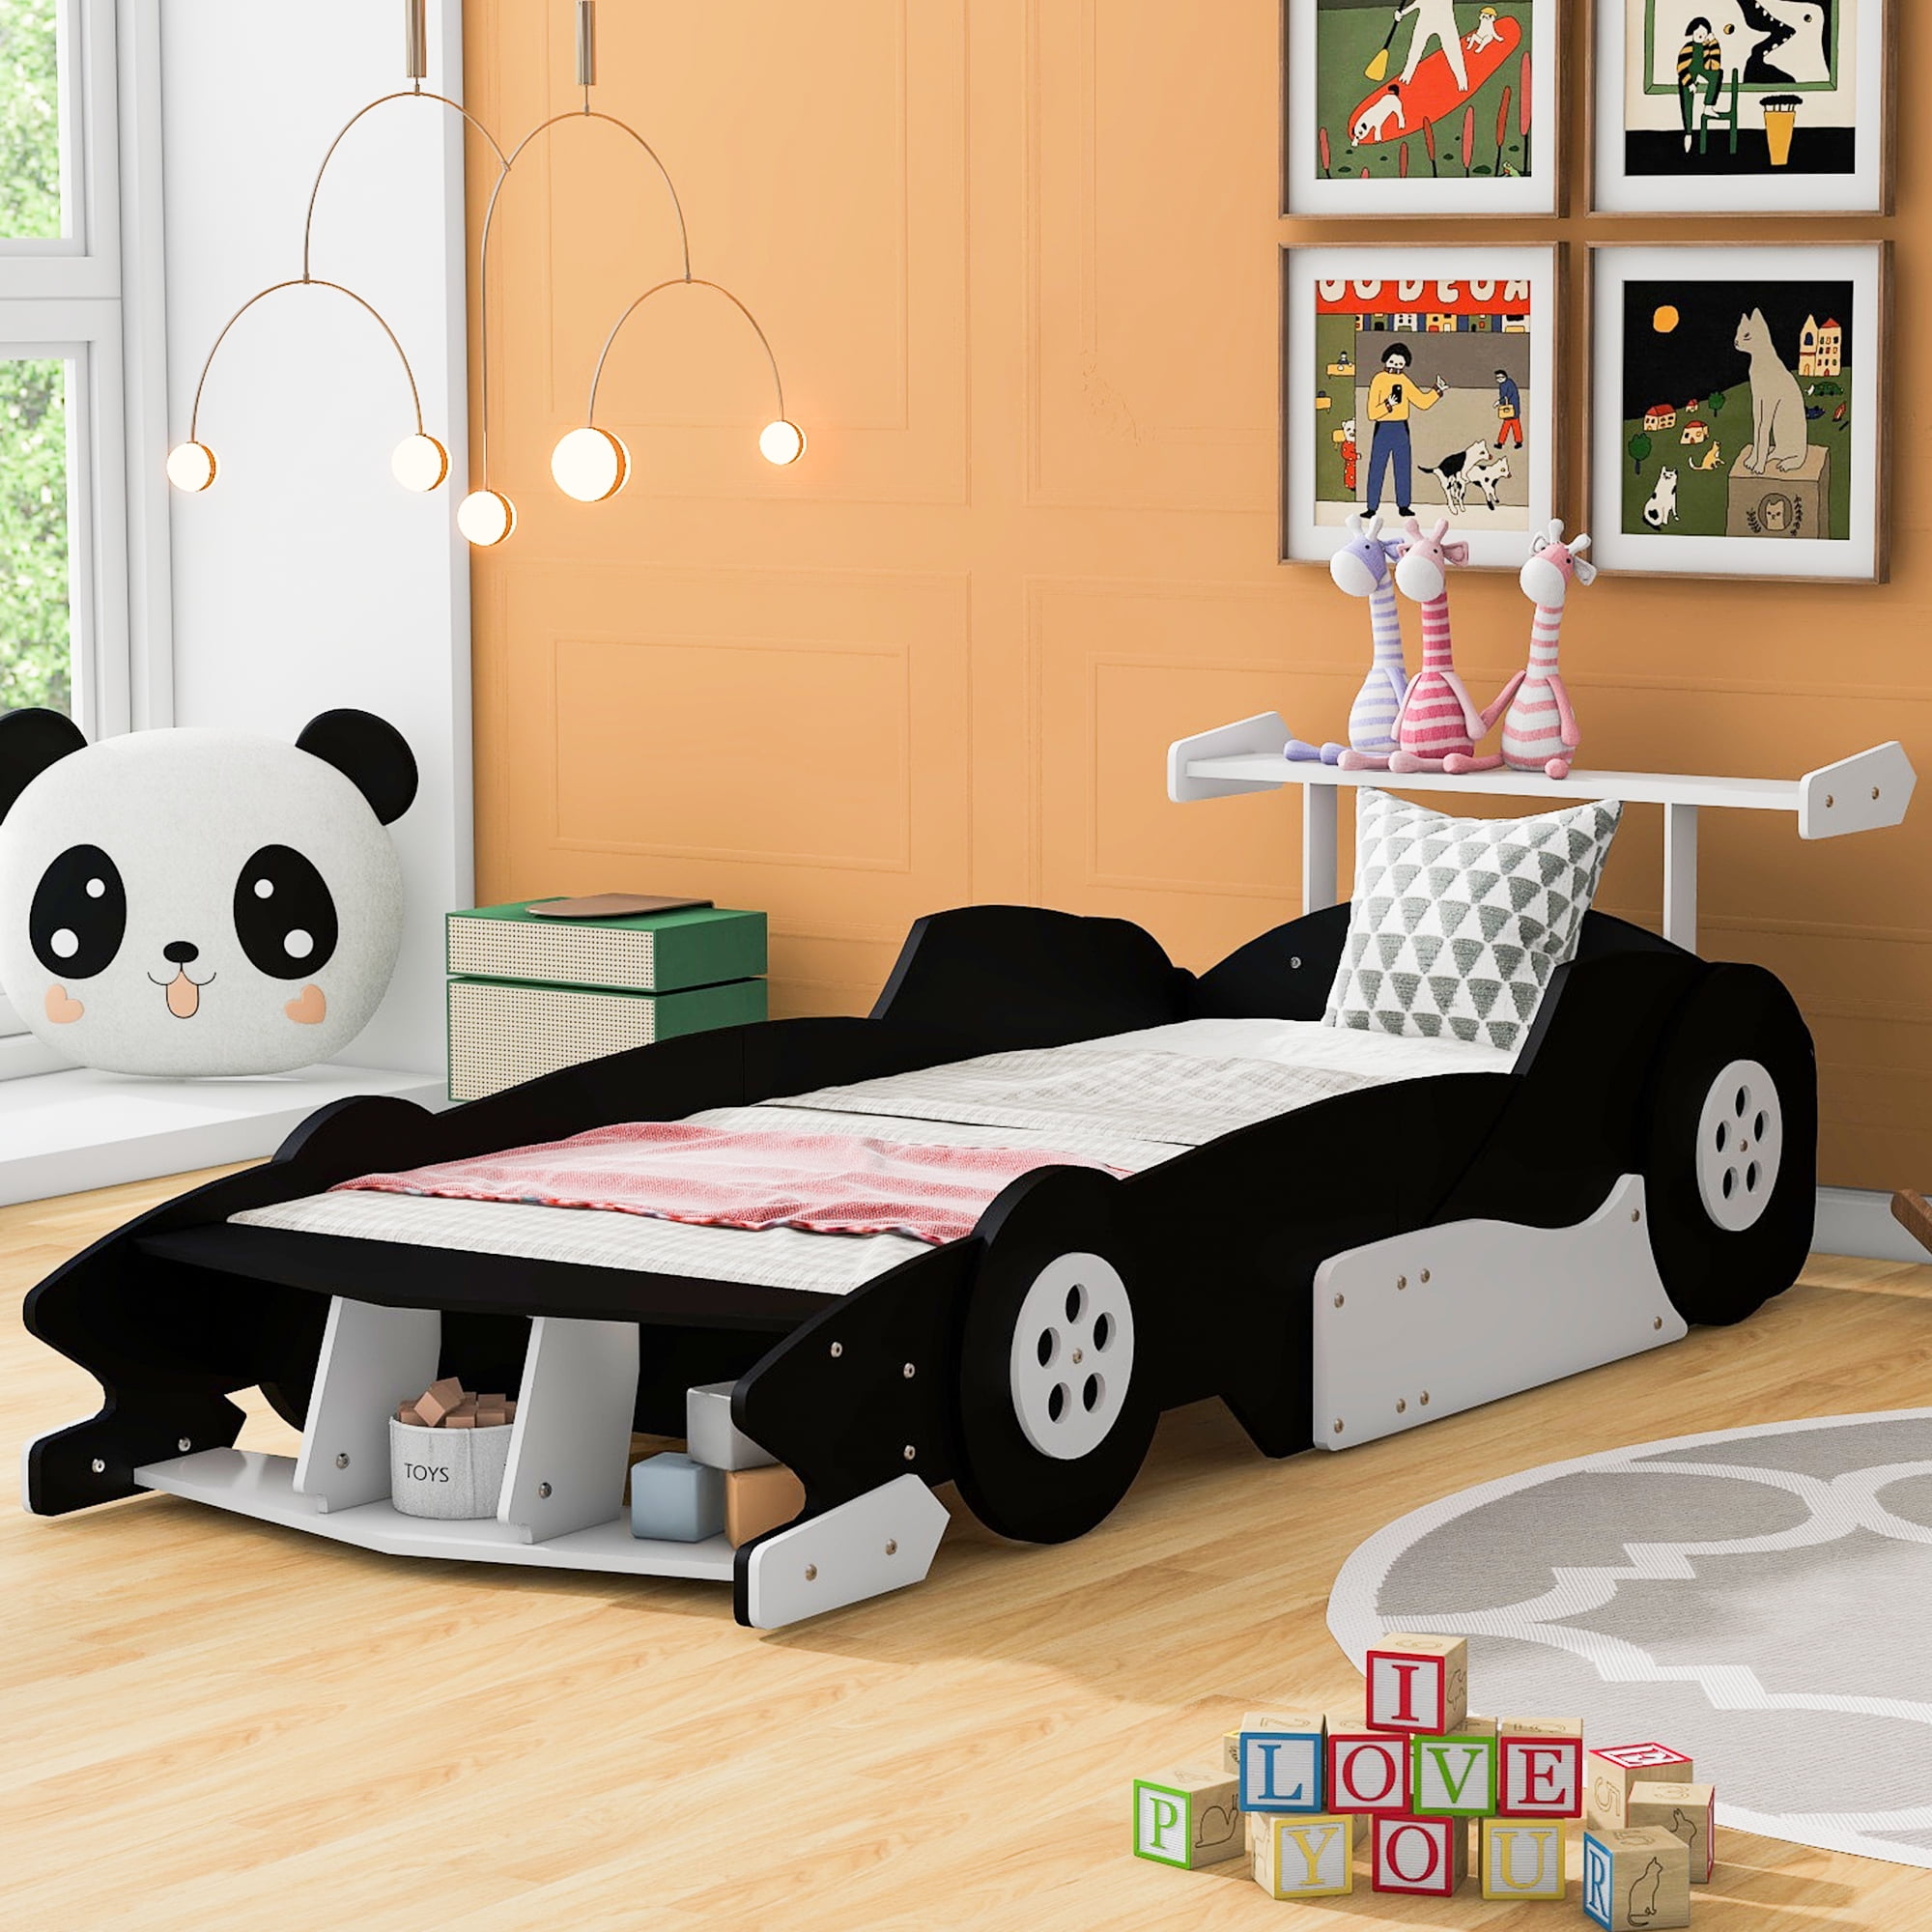 Car-Shaped Platform Bed with Wheels Wood Bed Frames Twin Size Kids